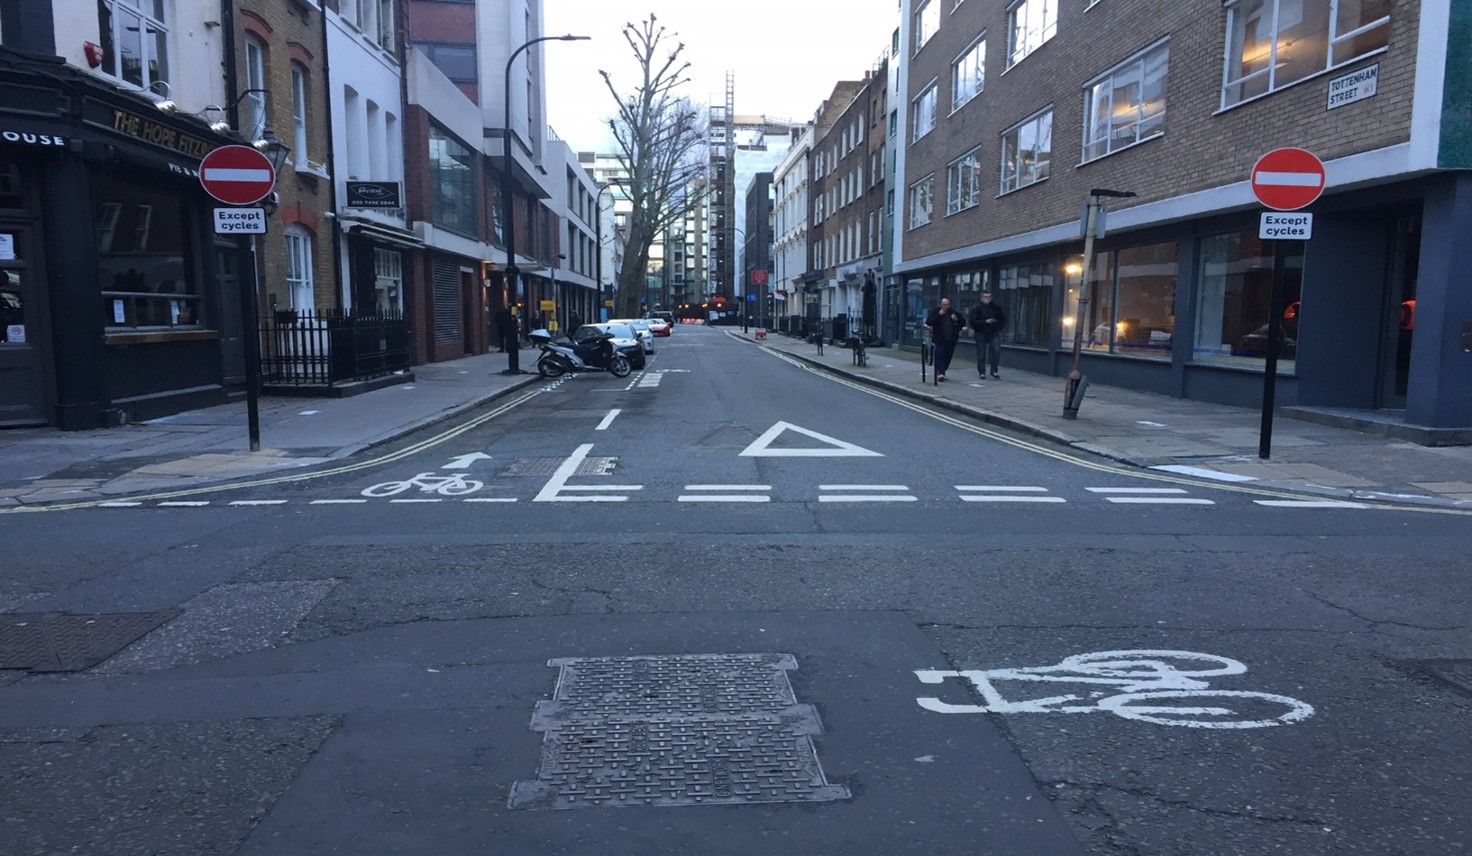 View of Tottenham Street with cycle signs